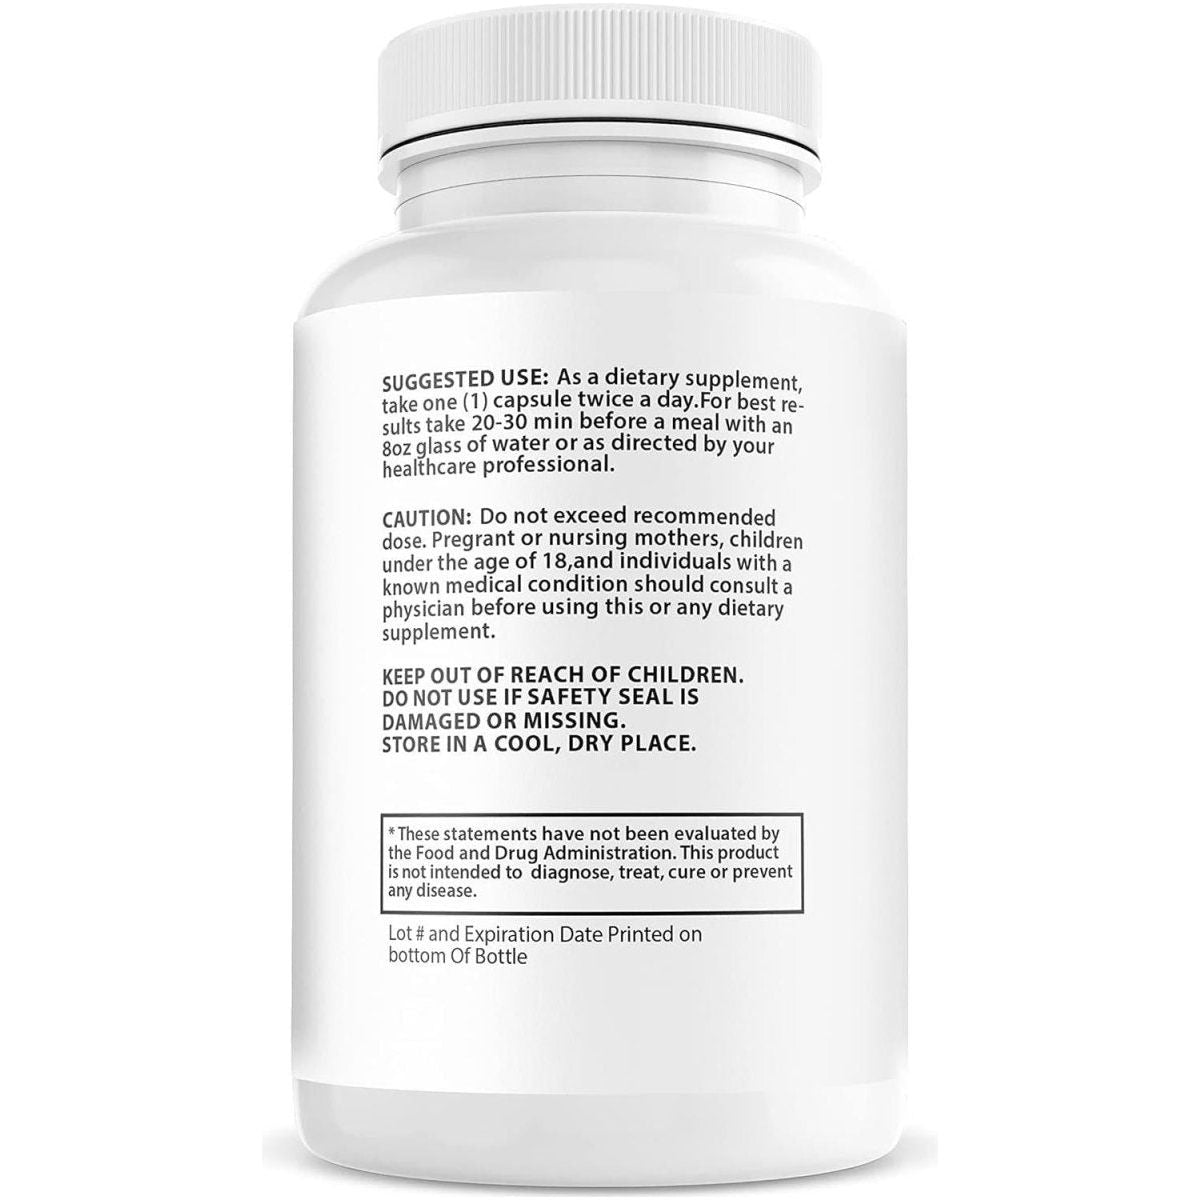 Lifestyle Keto Strong Advanced Formula 1300Mg, Made in the USA - 30 Day Supply (60 Capsules) - Glam Global UK